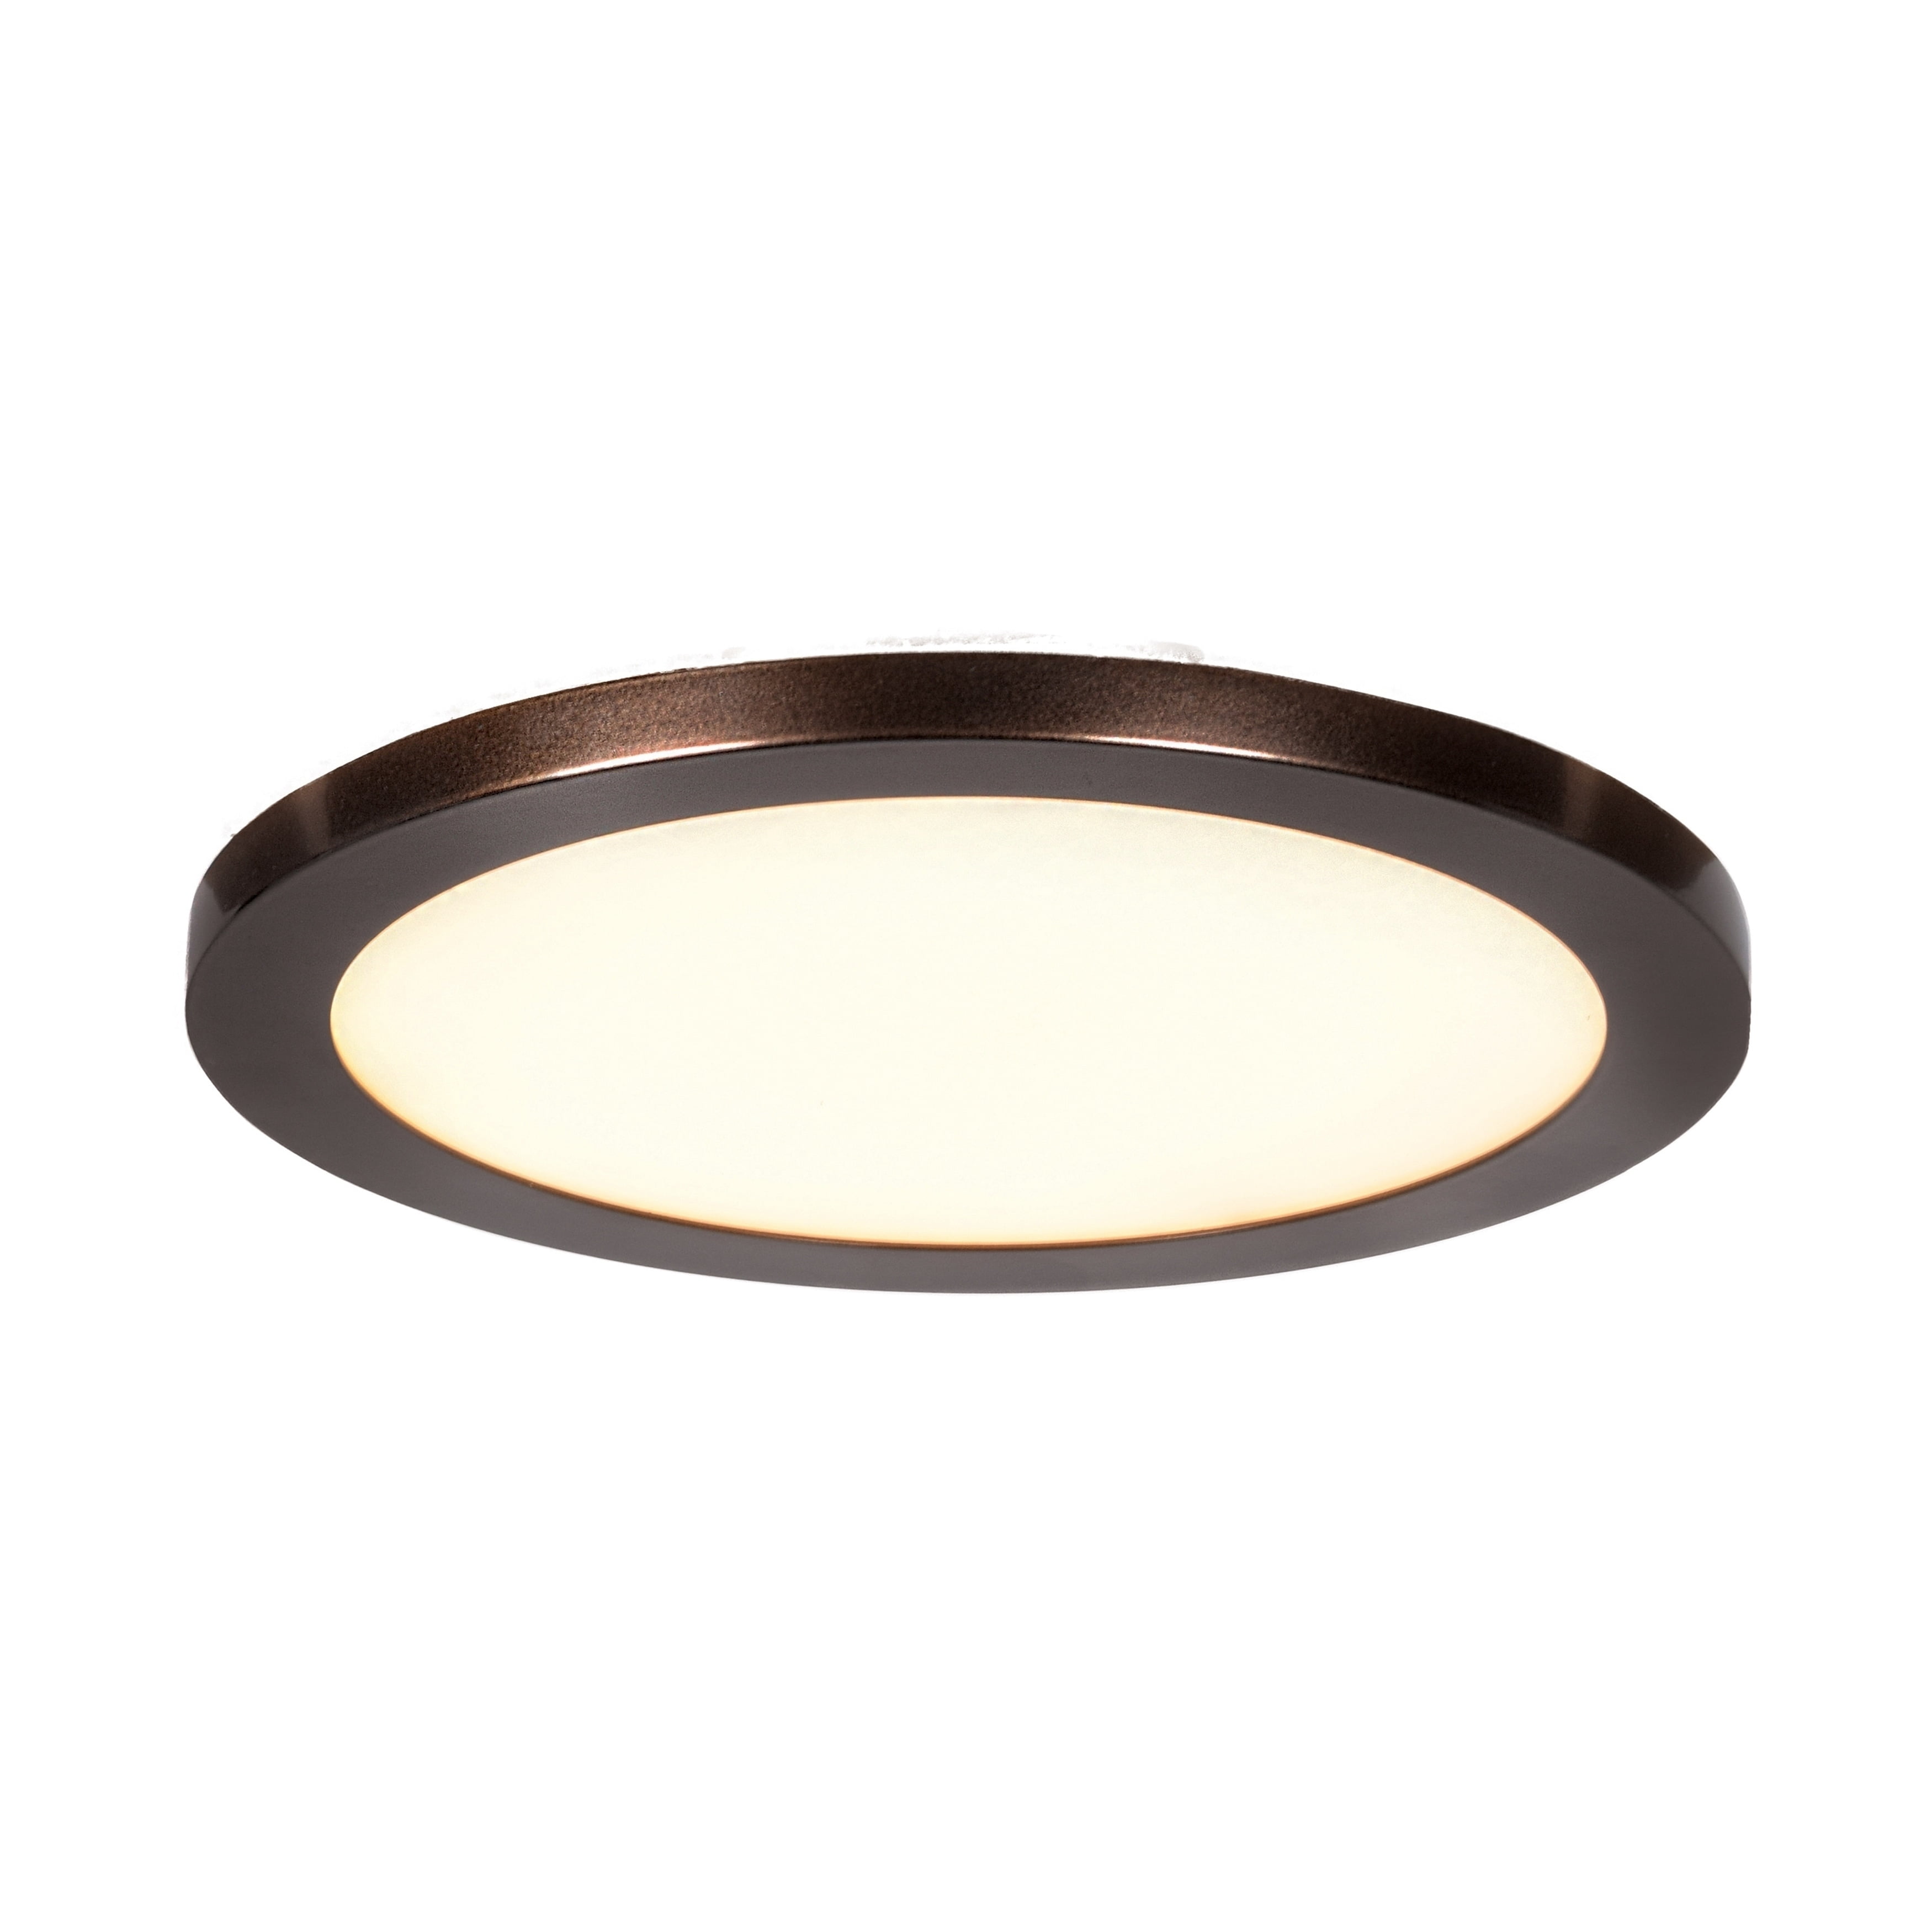 20812ledd-bs-acr 0.5 X 9.5 In. Disc Led Round Flush Mount, Brushed Steel & Acrylic Lens